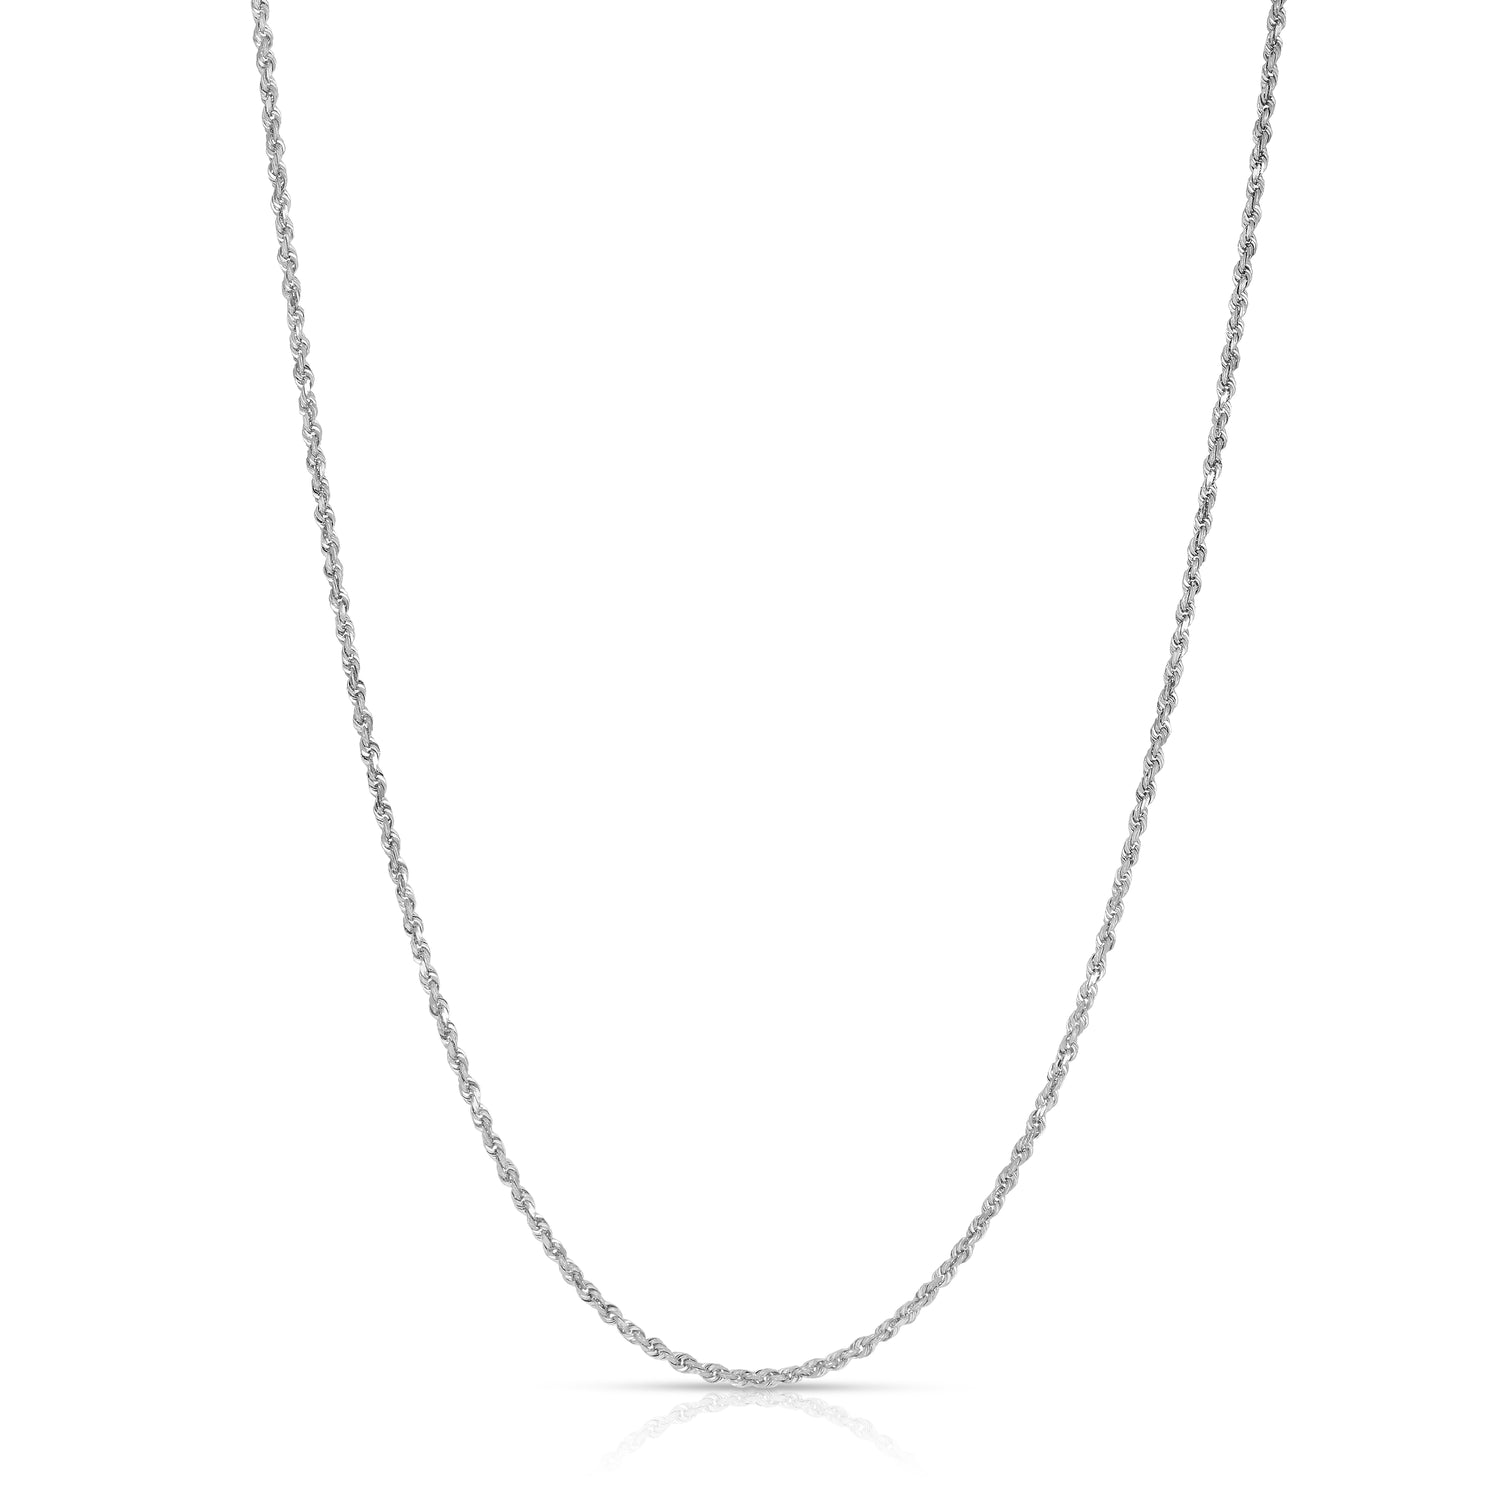 10k White Gold 2mm Solid Rope Chain Diamond Cut Necklace